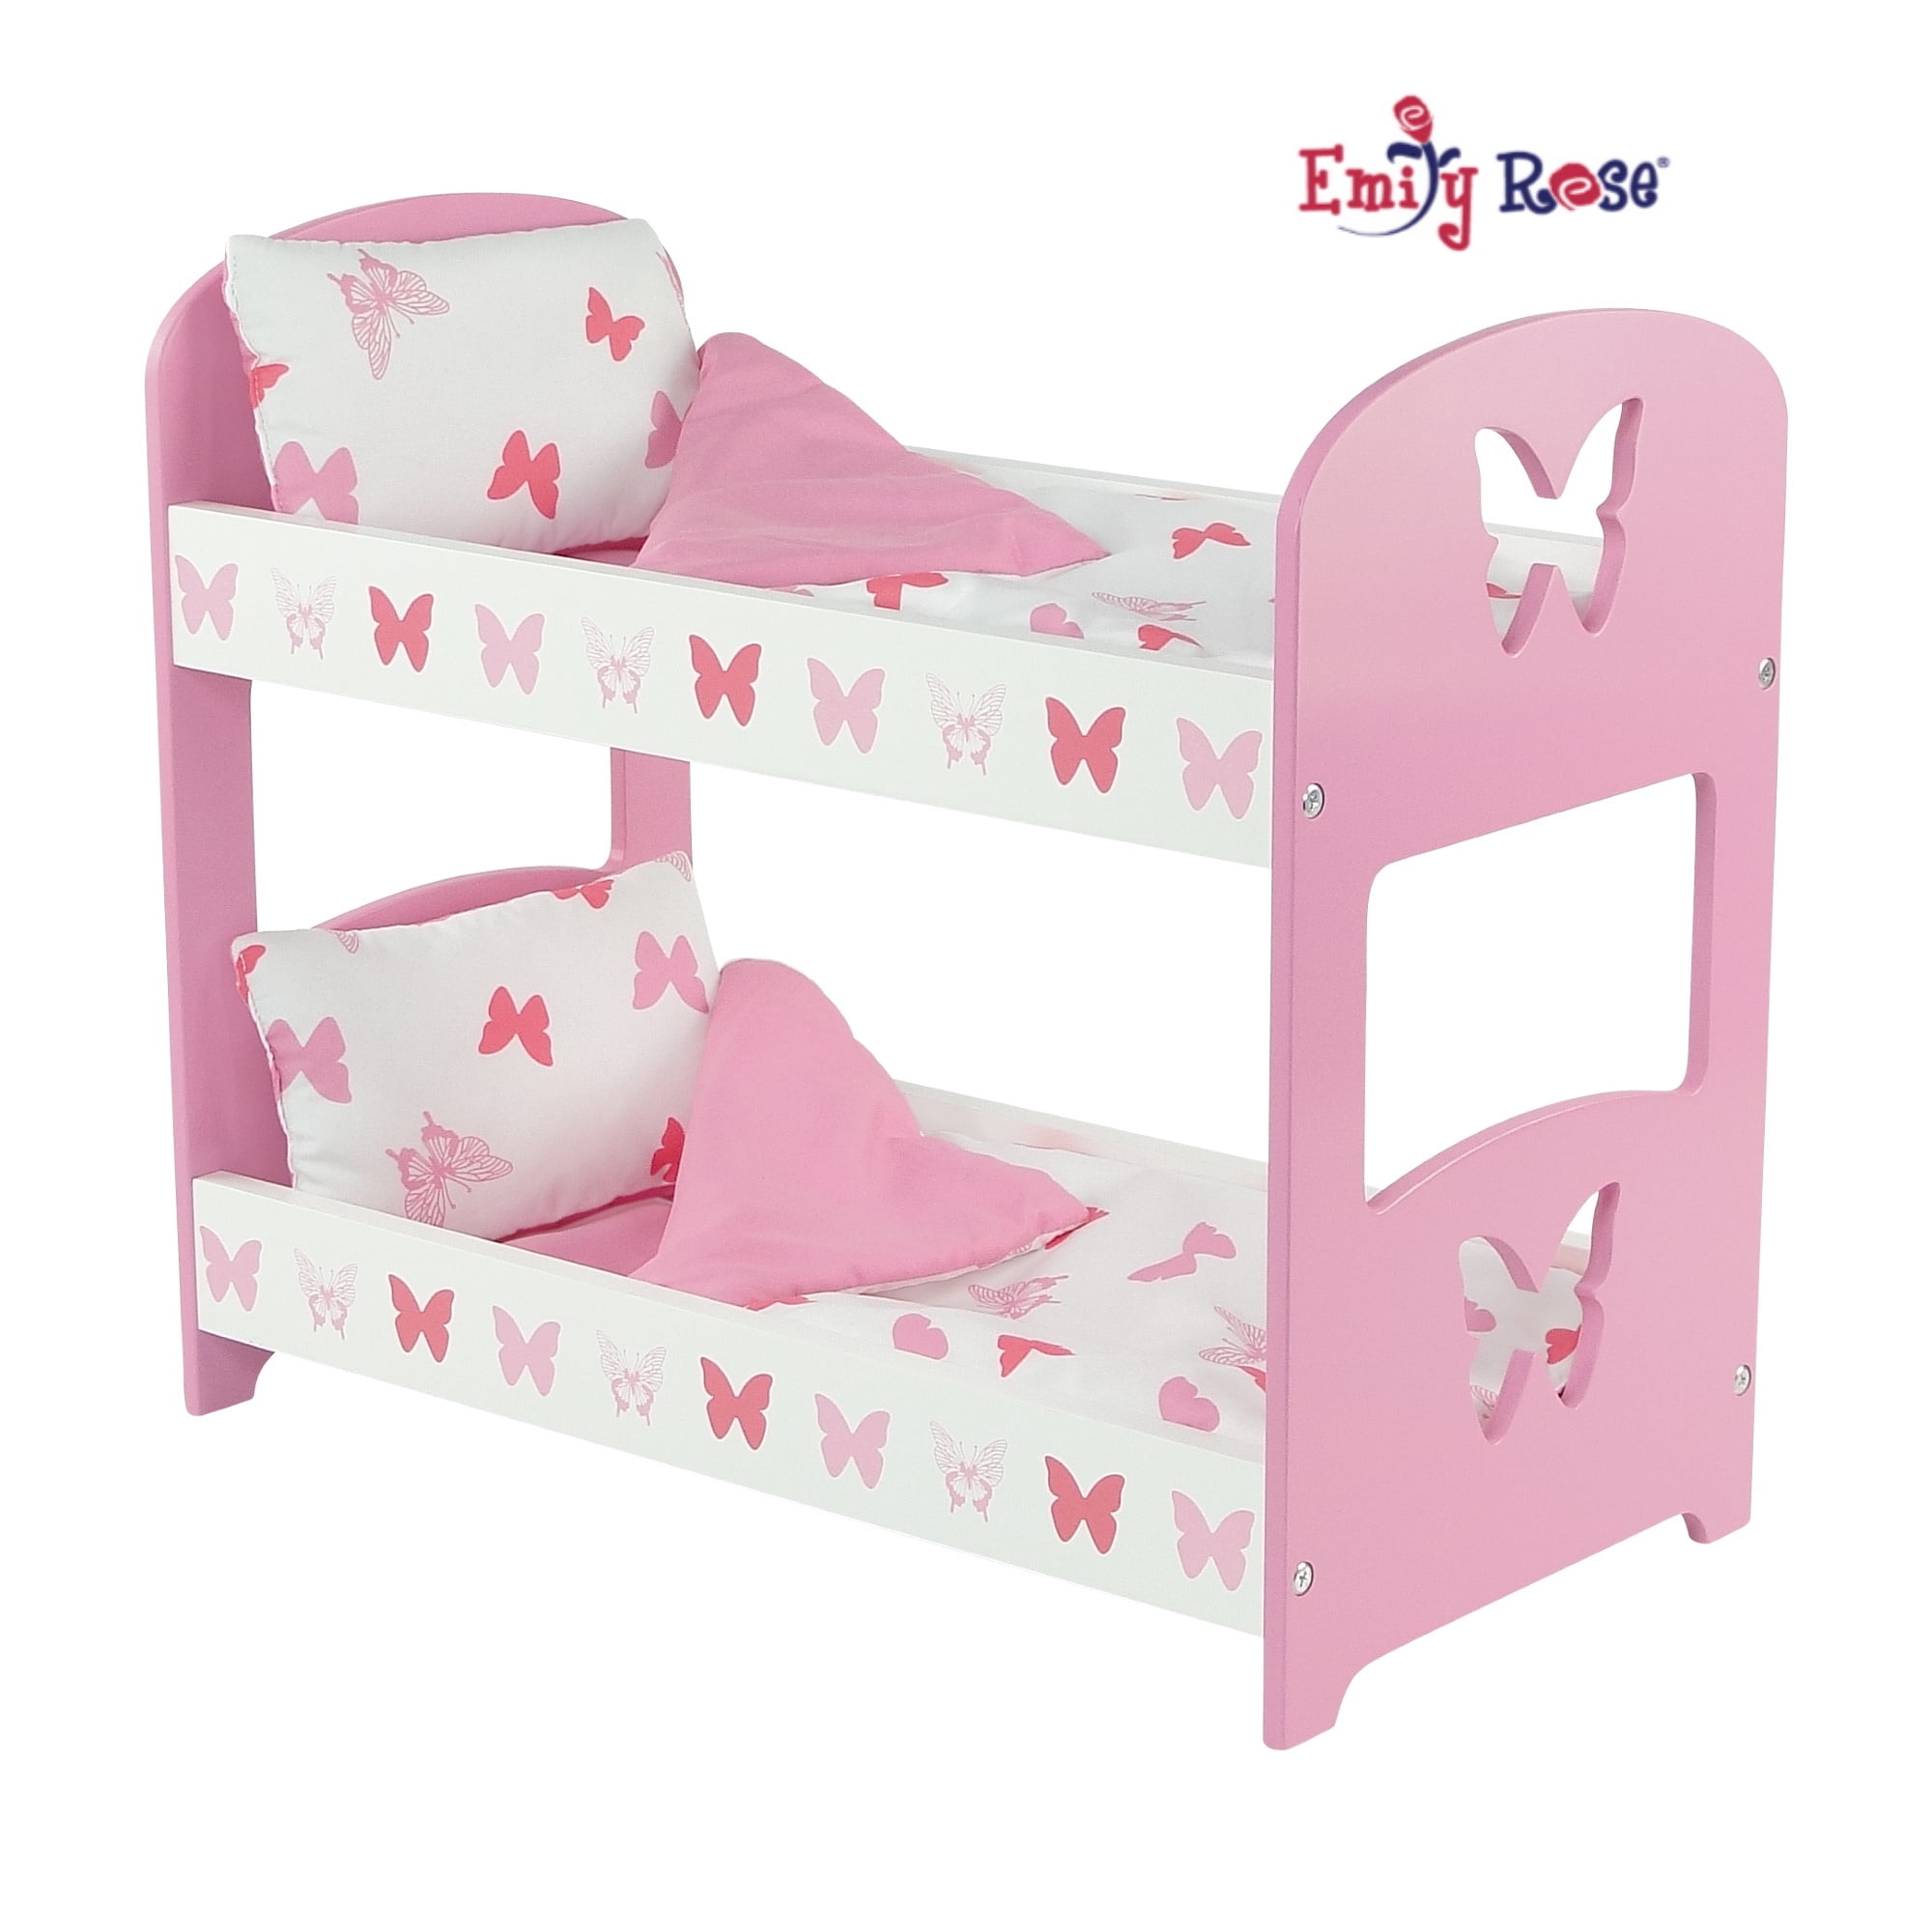 Emily Rose 18 Inch Doll Bed Com, Doll Bunk Beds For 18 Inch Dolls